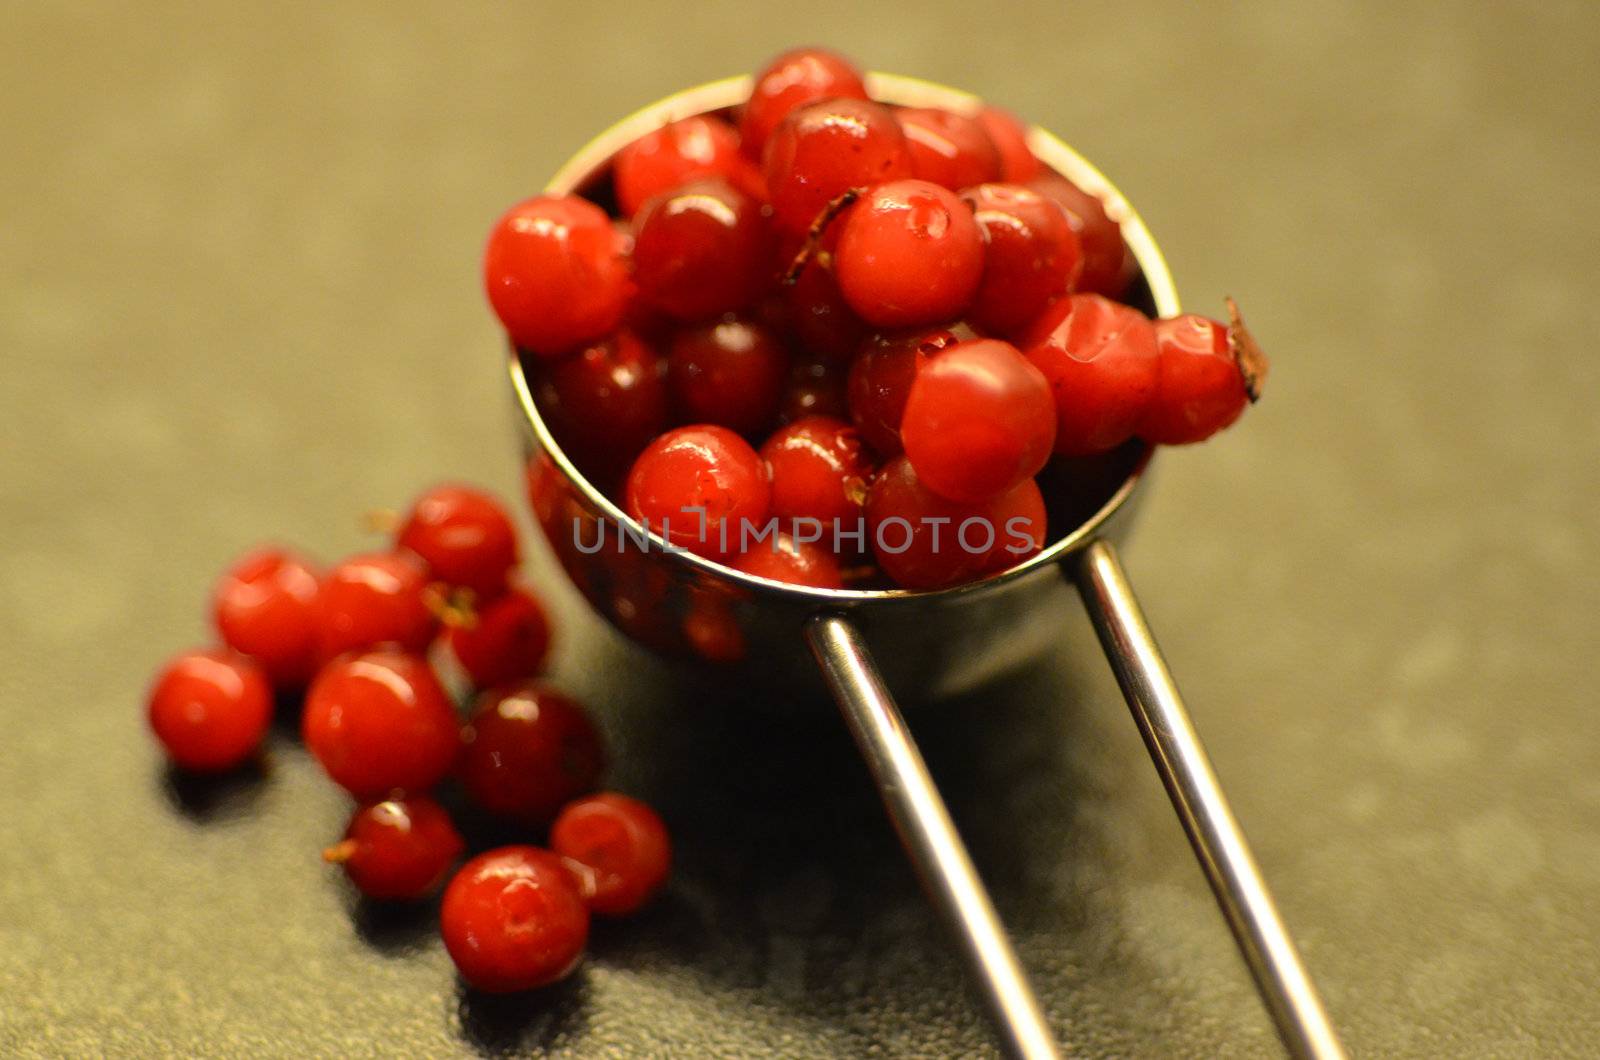 A spoonful of lingonberries.